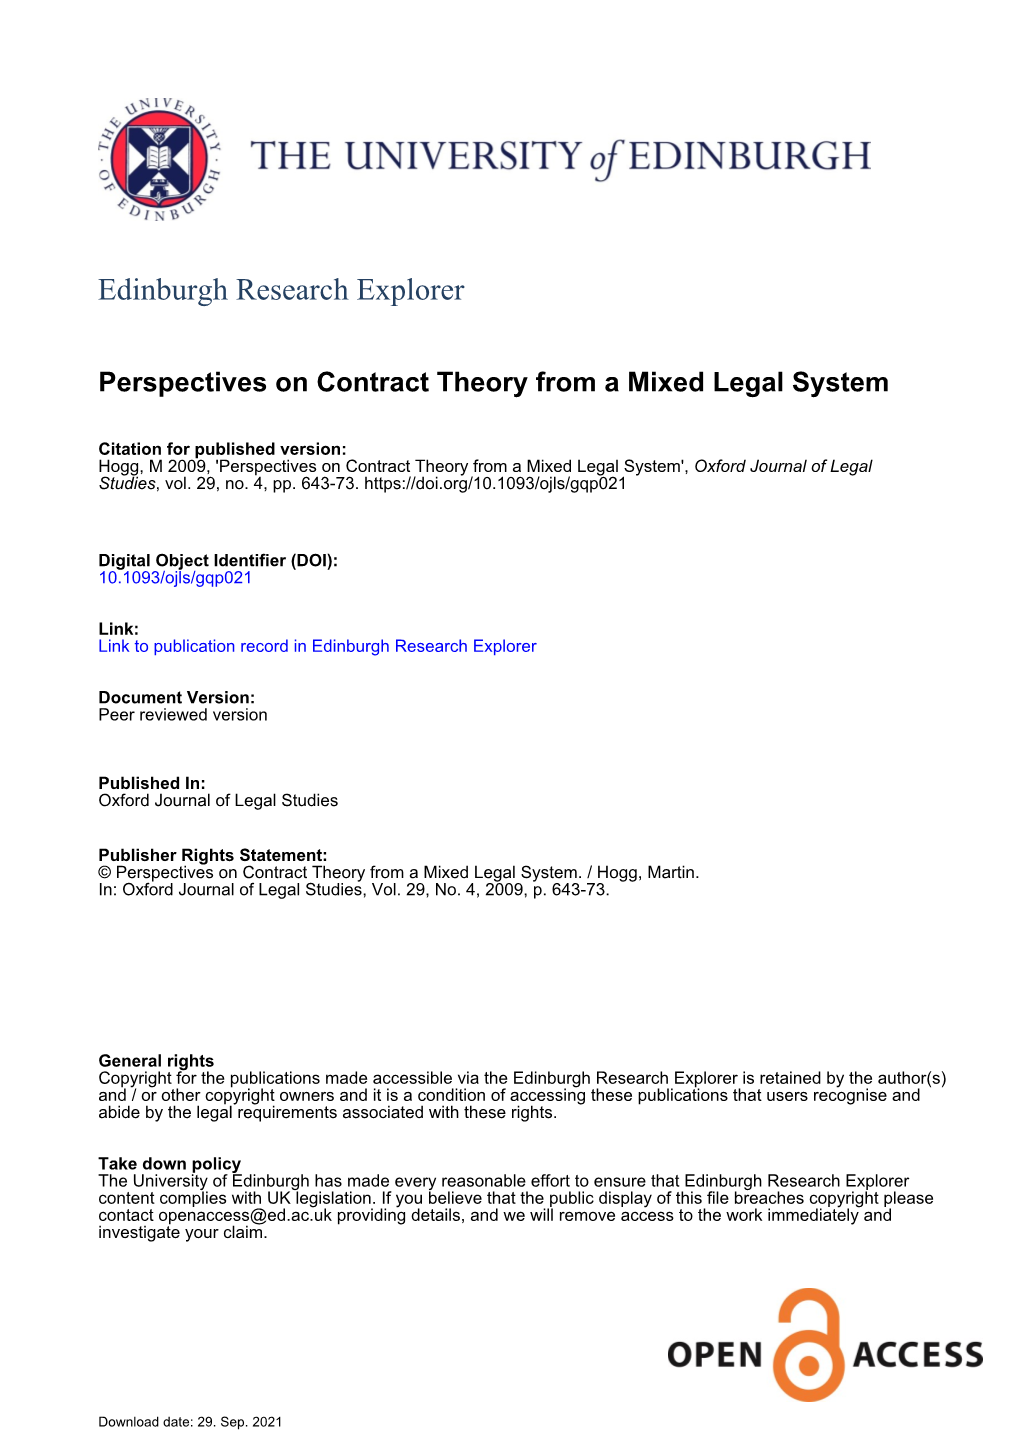 Perspectives on Contract Theory from a Mixed Legal System